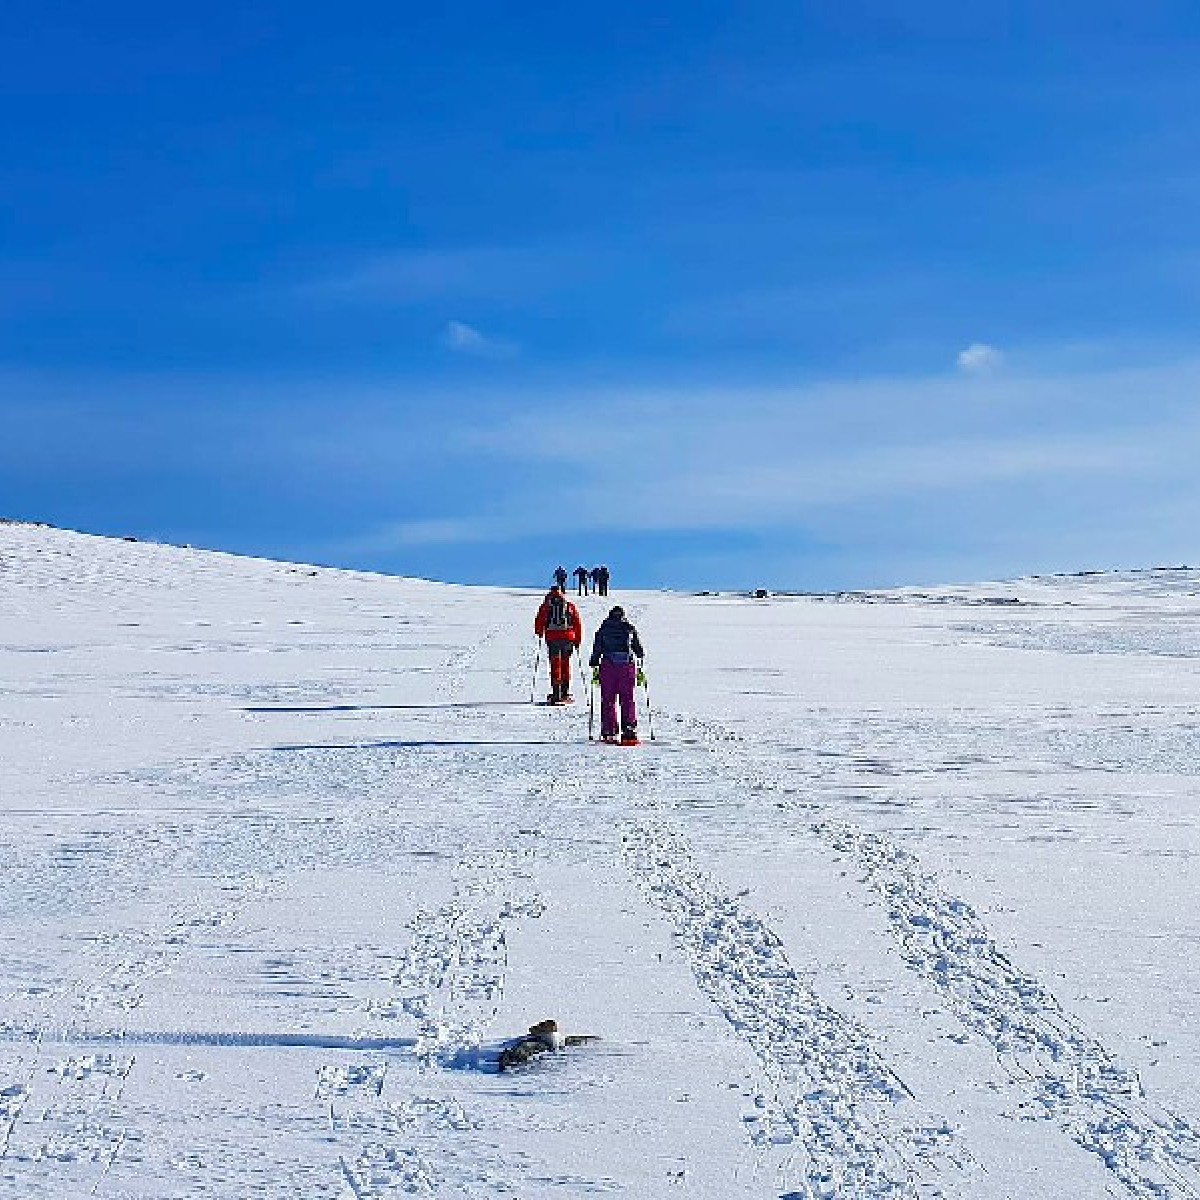 MS Polarlys had a fantastic day in Honningsvåg - gateway to the North Cape. Sparkling sunshine, blue sky, and snowshoeing on perfect paths ☀️❄️ What's your favorite activity in Honningsvåg?